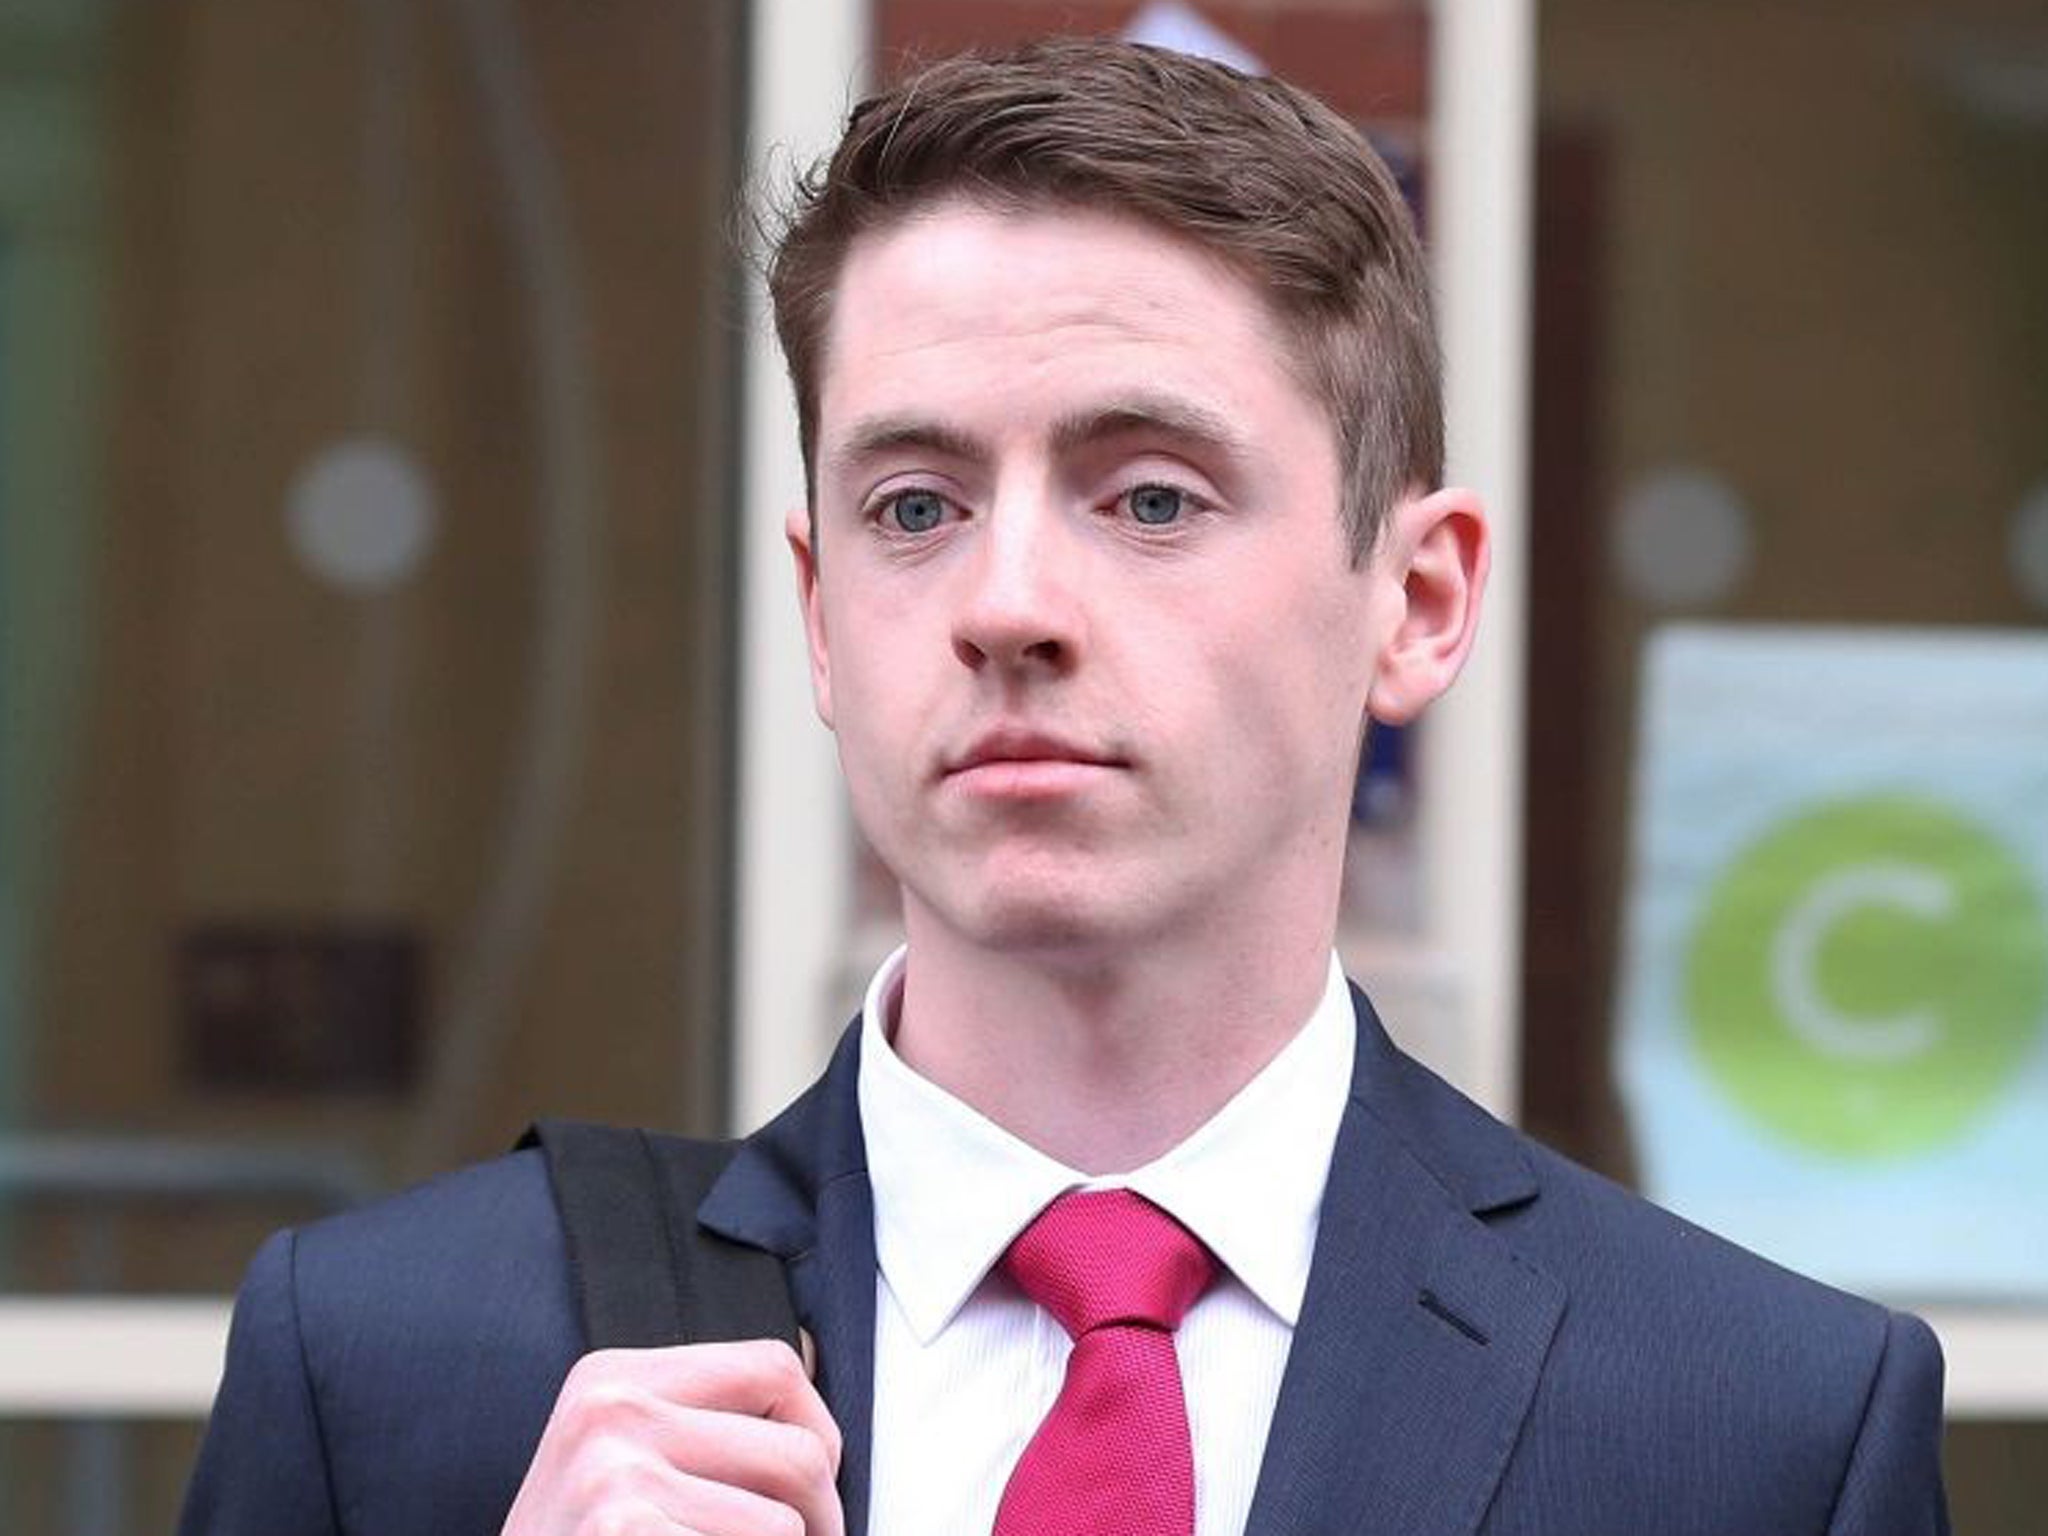 James White, 21, admitted causing unnecessary suffering to the female hamster in February last year